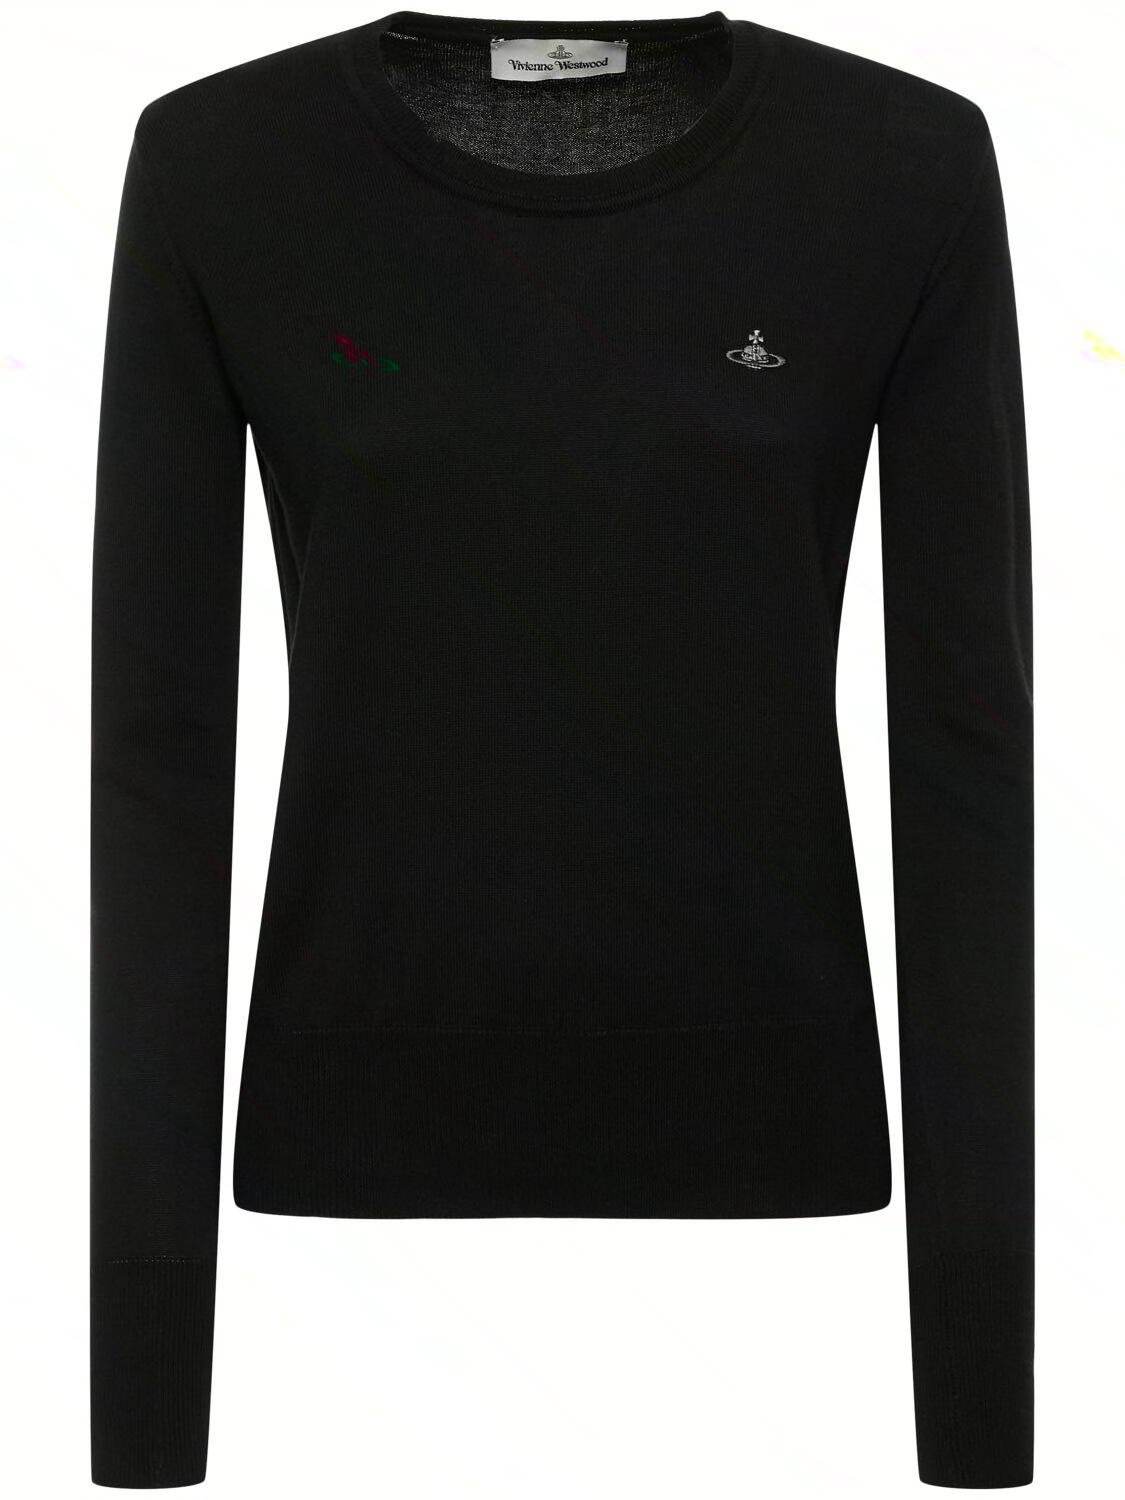 Bea Cotton Sweater by VIVIENNE WESTWOOD